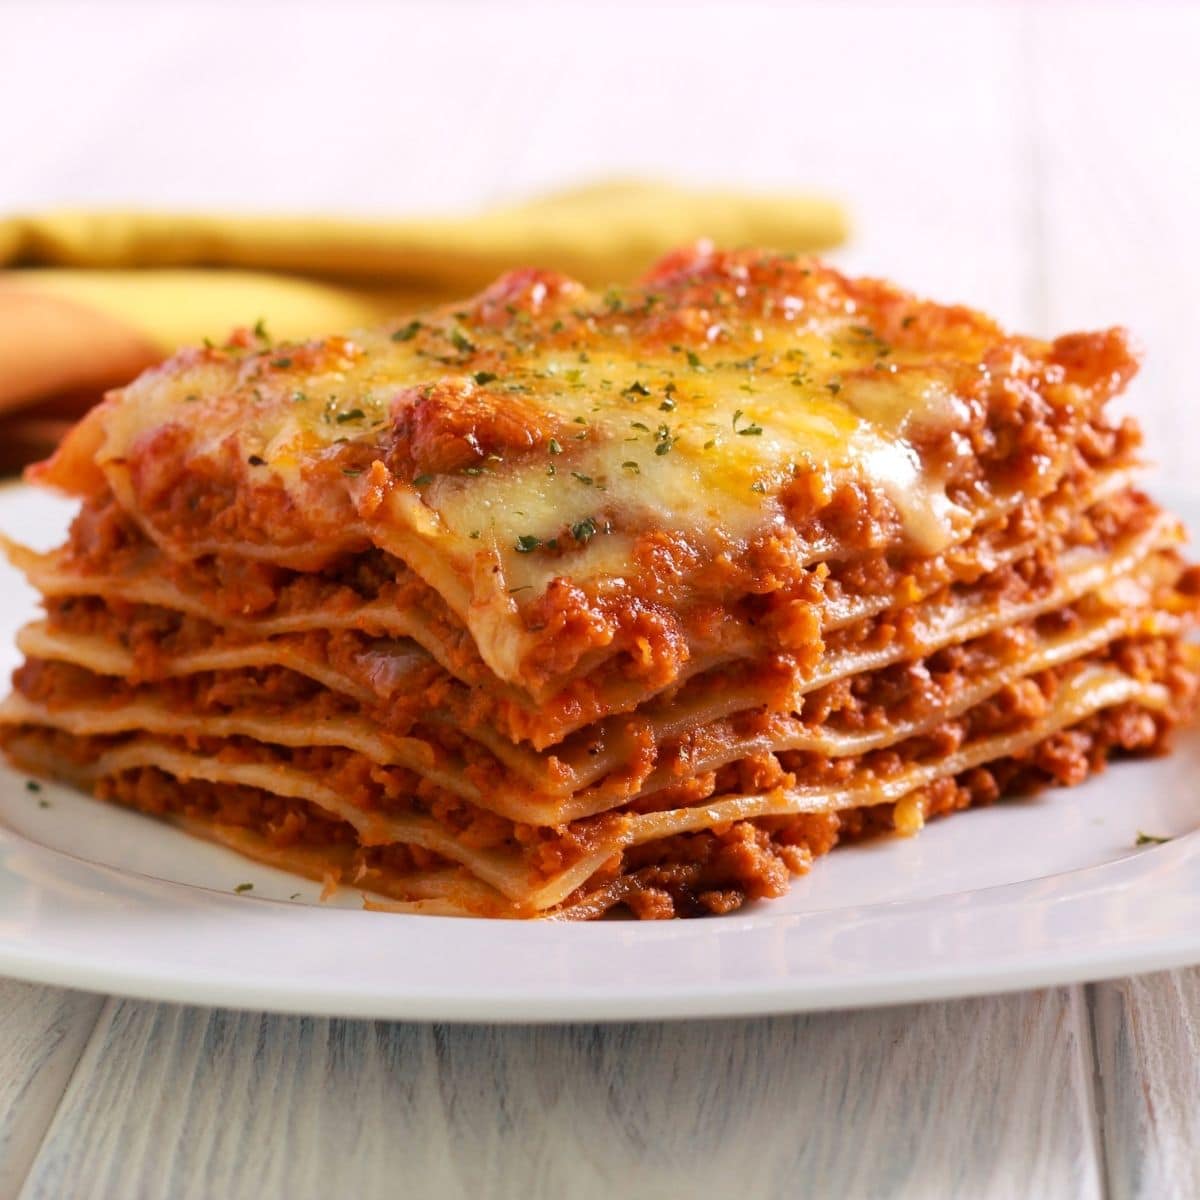 Can You Microwave Stouffer’s Lasagna? – (Answered)